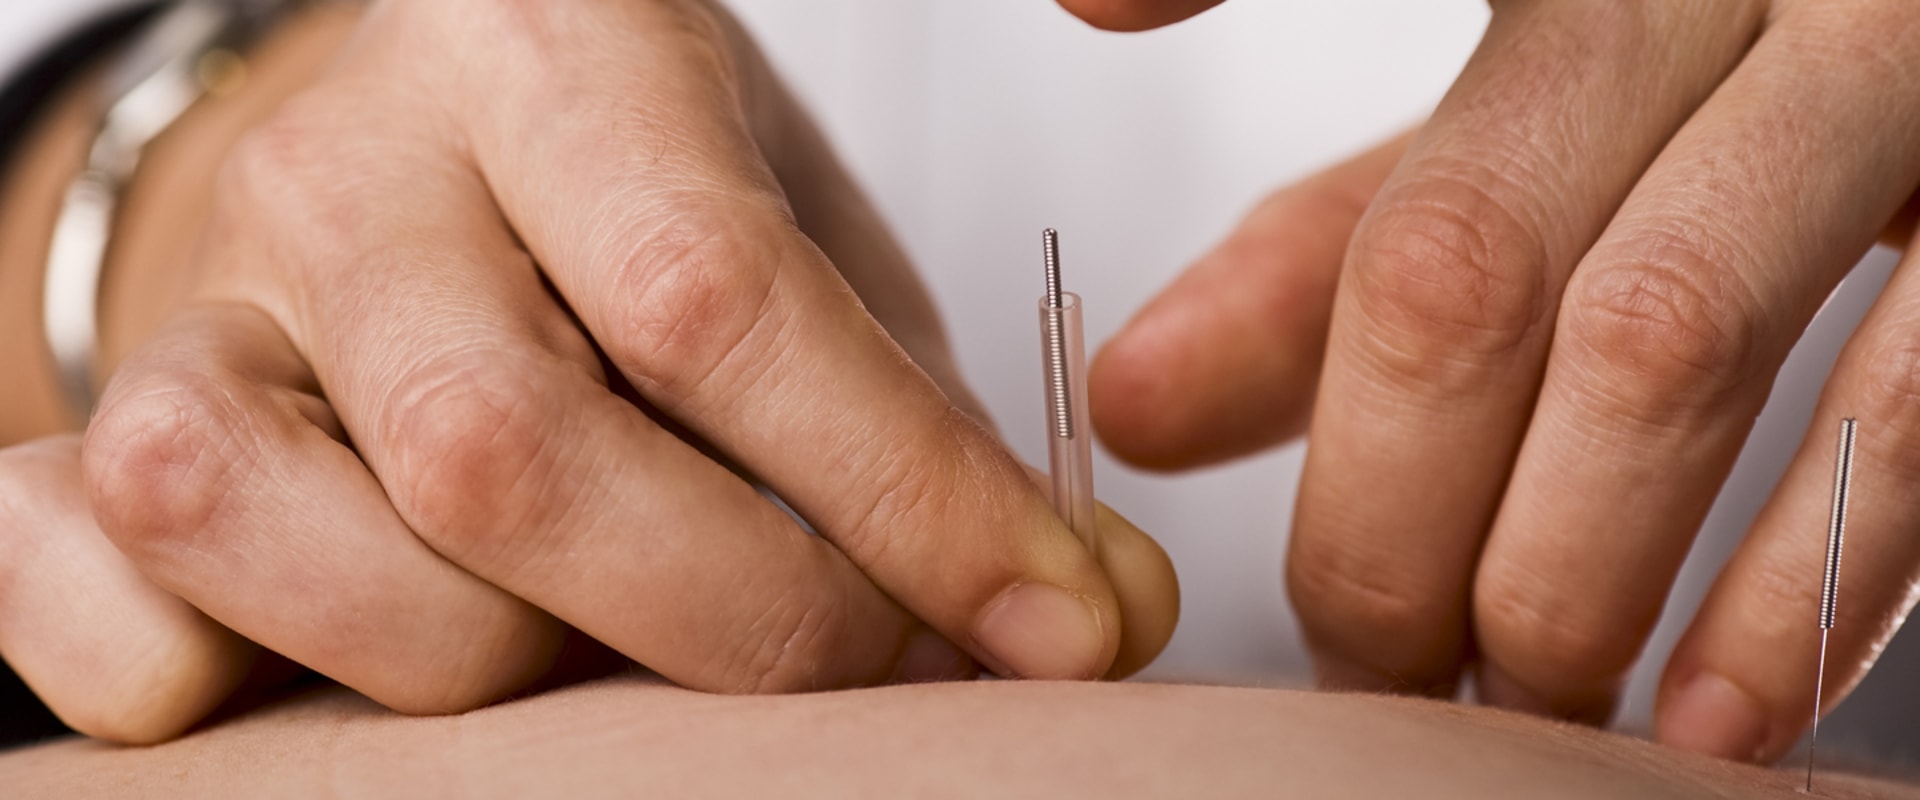 Can Children Receive Acupuncture Treatments?